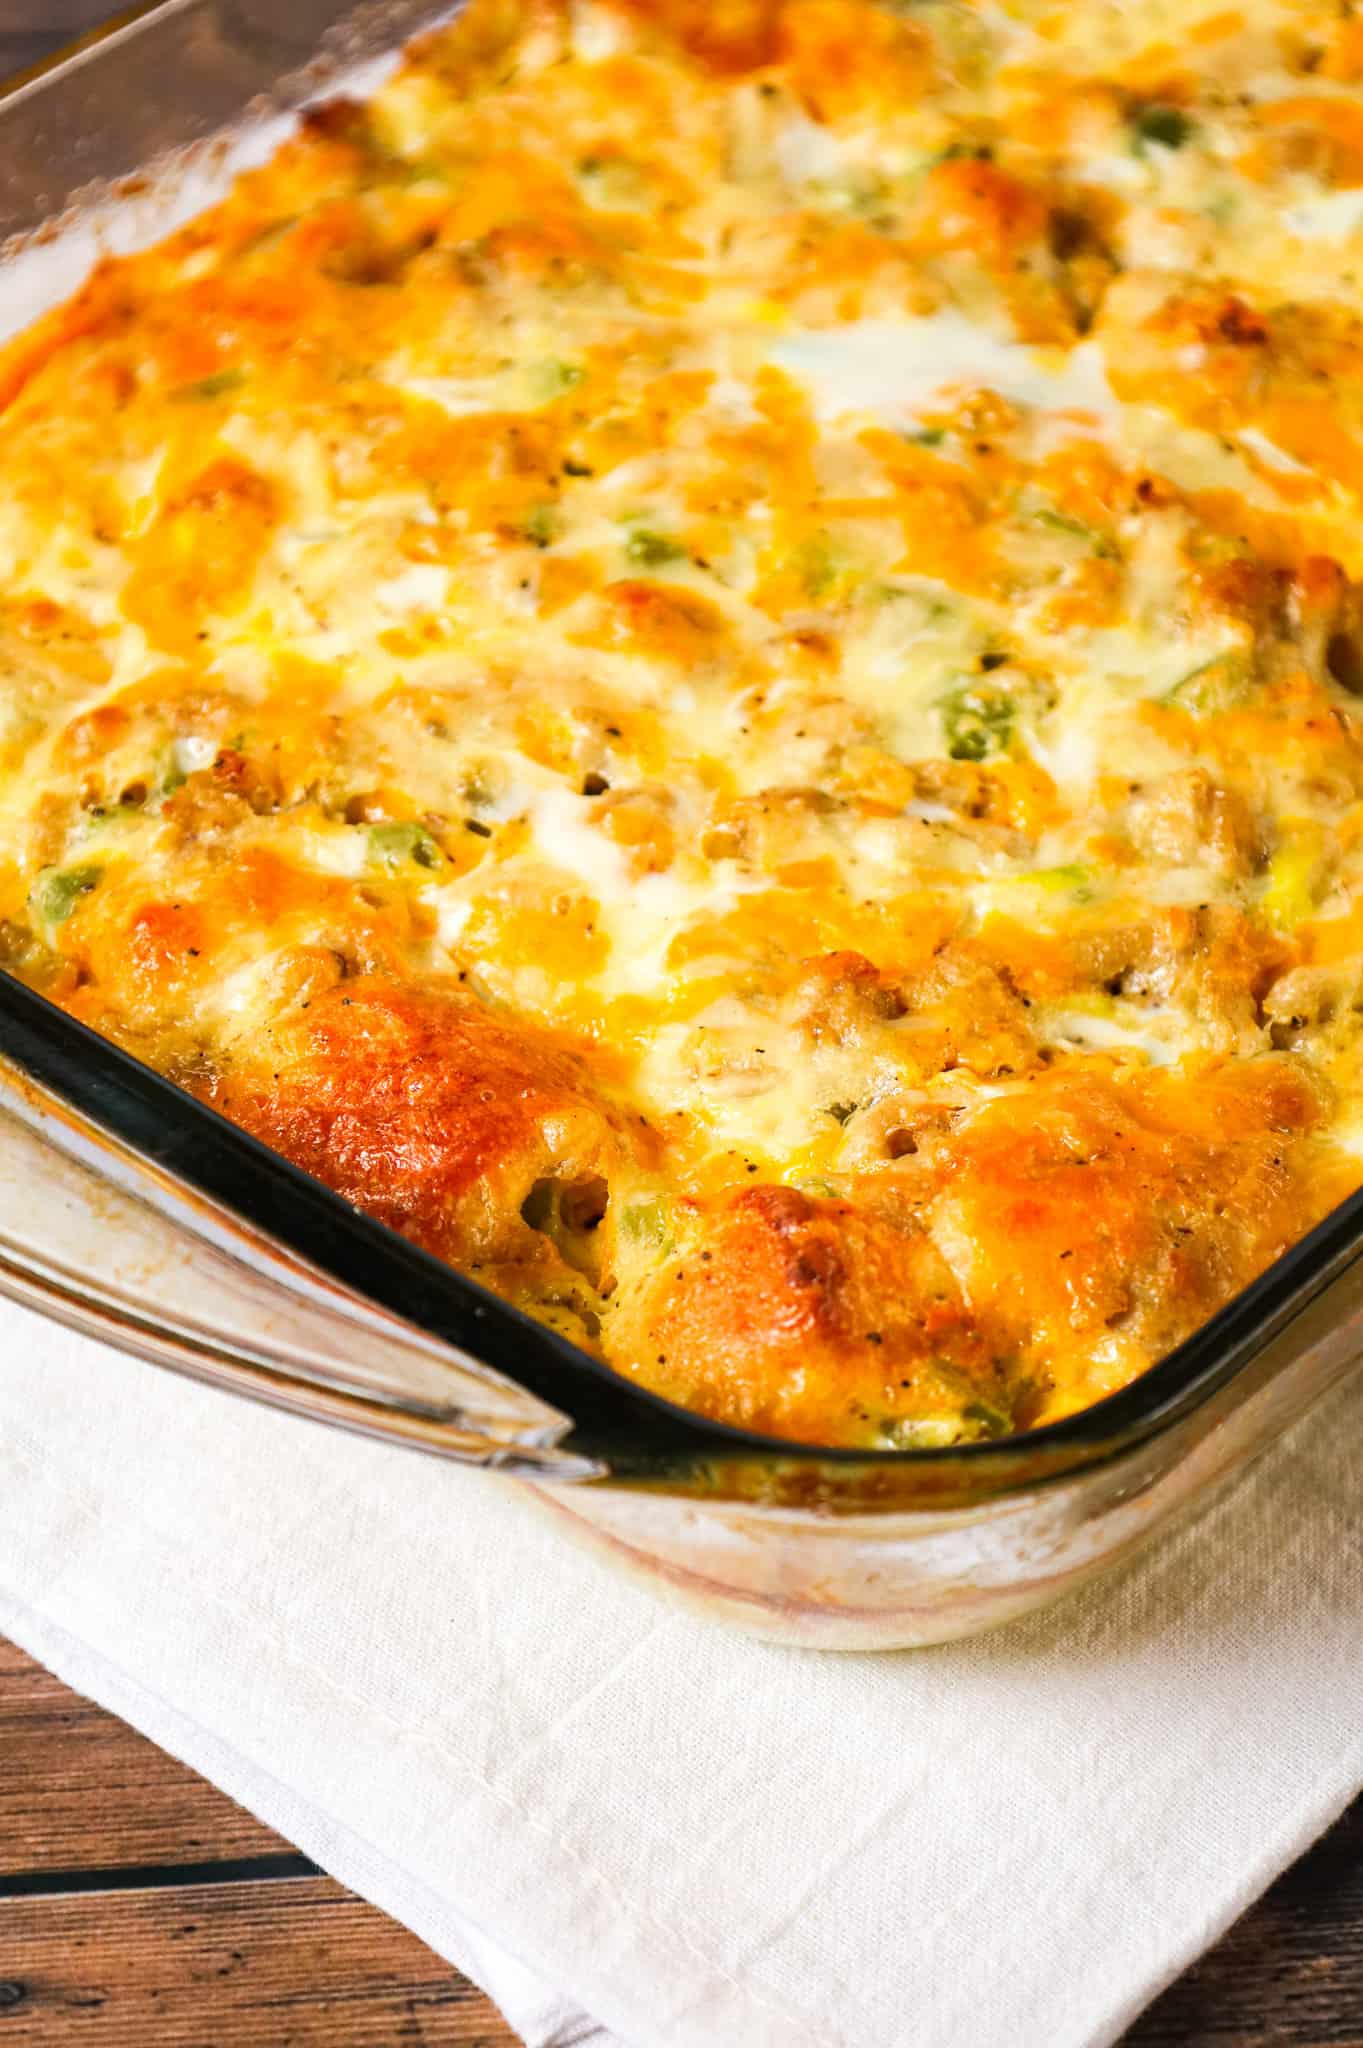 Breakfast Casserole with Biscuits is an easy breakfast dish loaded with sausage, egg, green peppers, Pillsbury biscuits and shredded cheese.